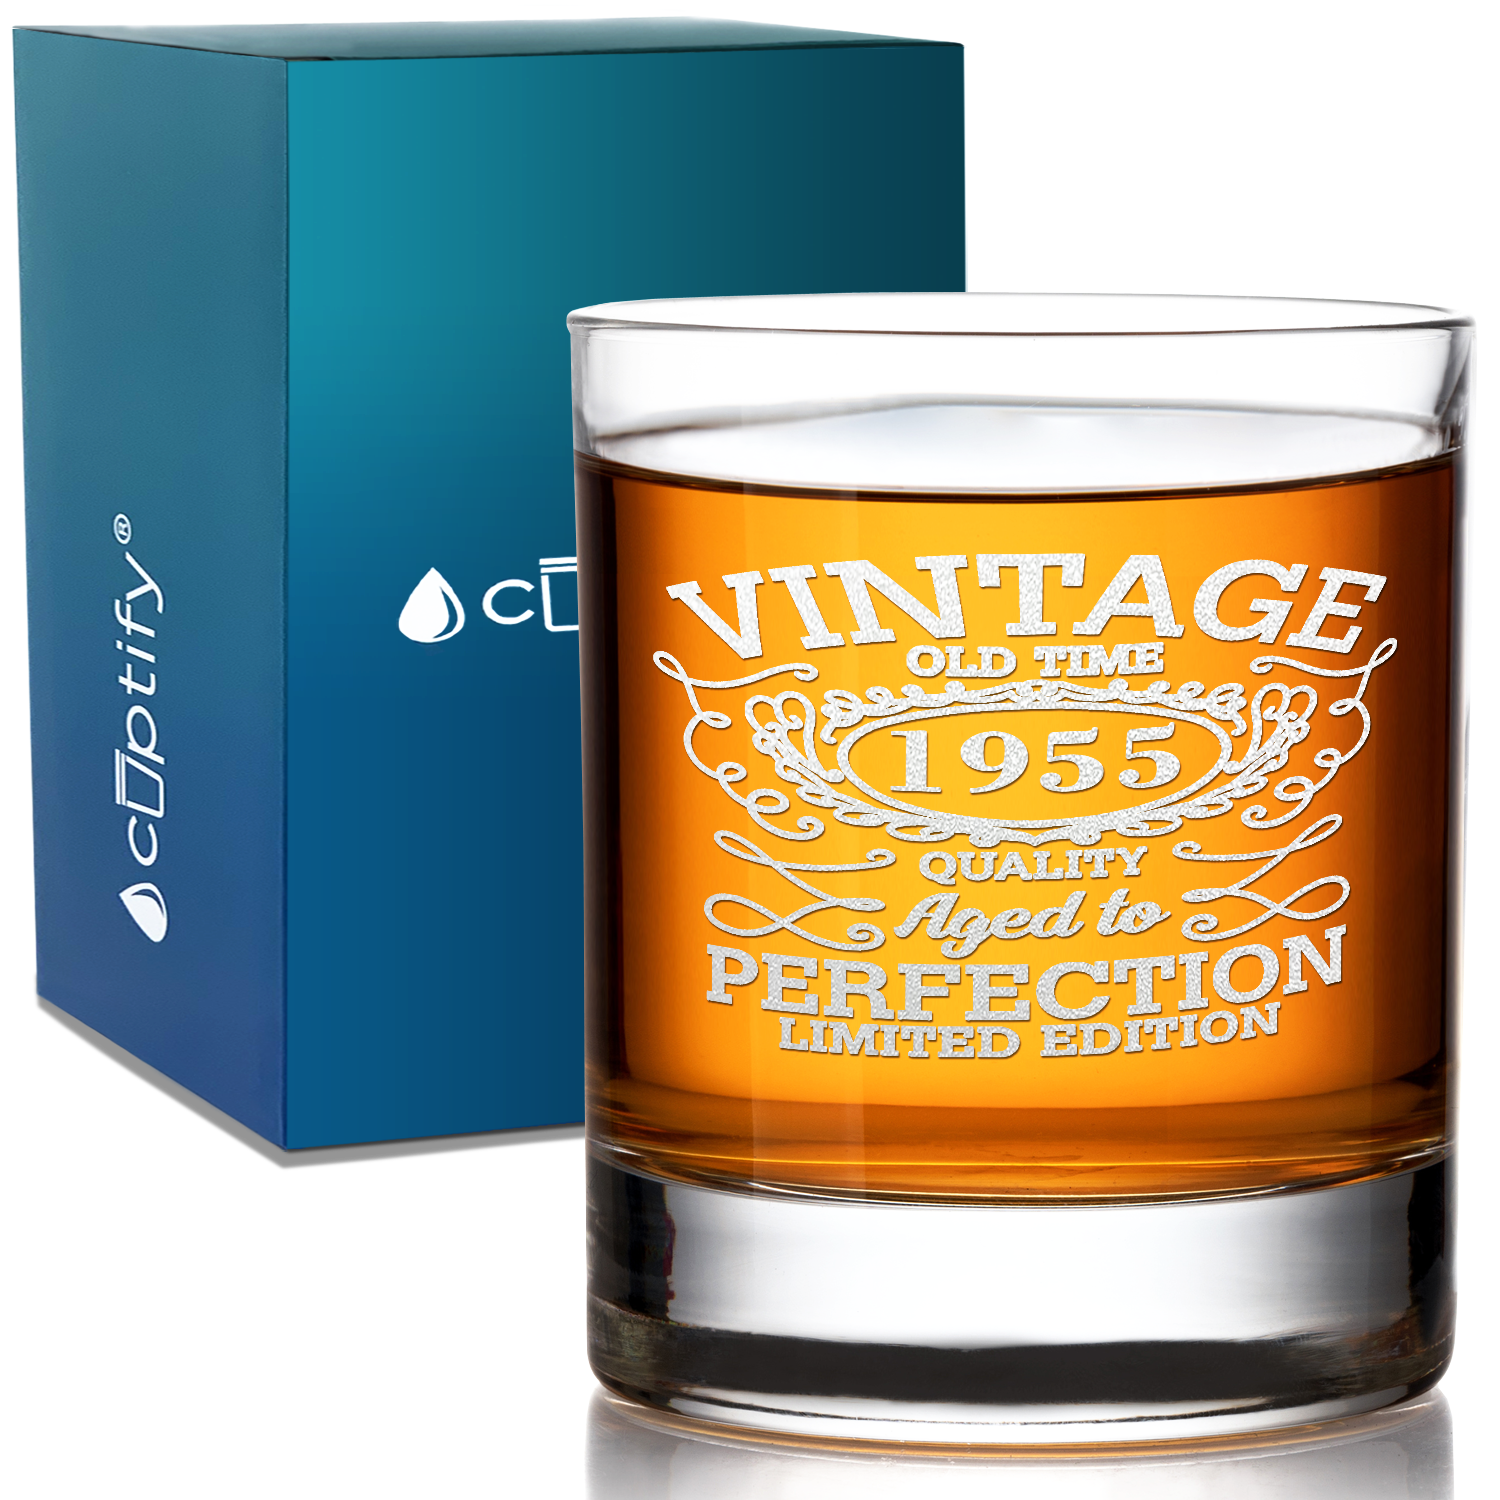 66th Birthday Vintage 66 Years Old Time 1955 Quality Laser Engraved 10.25oz Old Fashion Glass